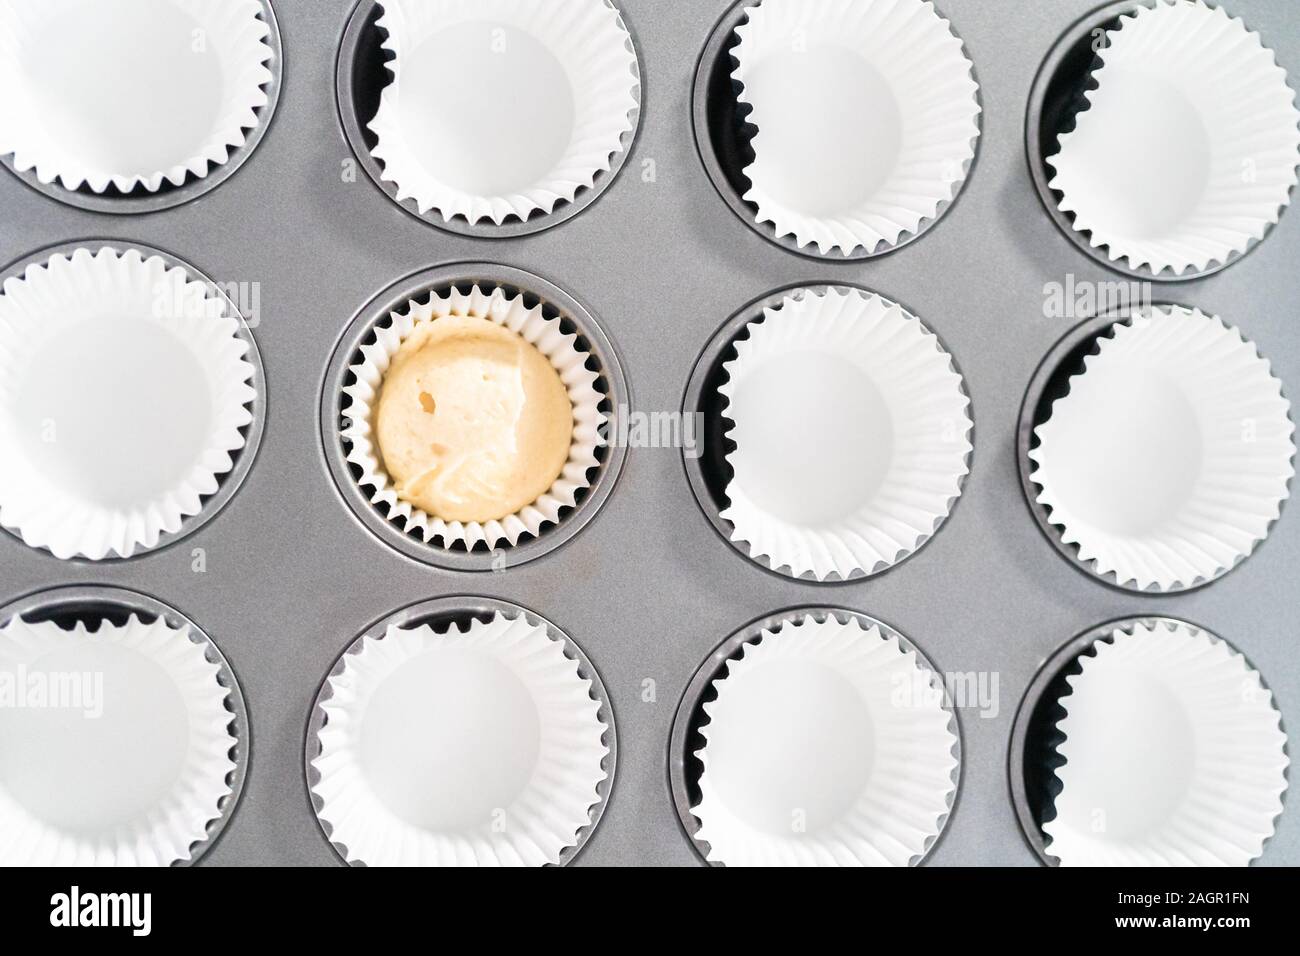 https://c8.alamy.com/comp/2AGR1FN/scooping-cupcake-batter-into-cupcake-pan-lined-with-cupcake-liners-to-bake-vanilla-cupcakes-2AGR1FN.jpg